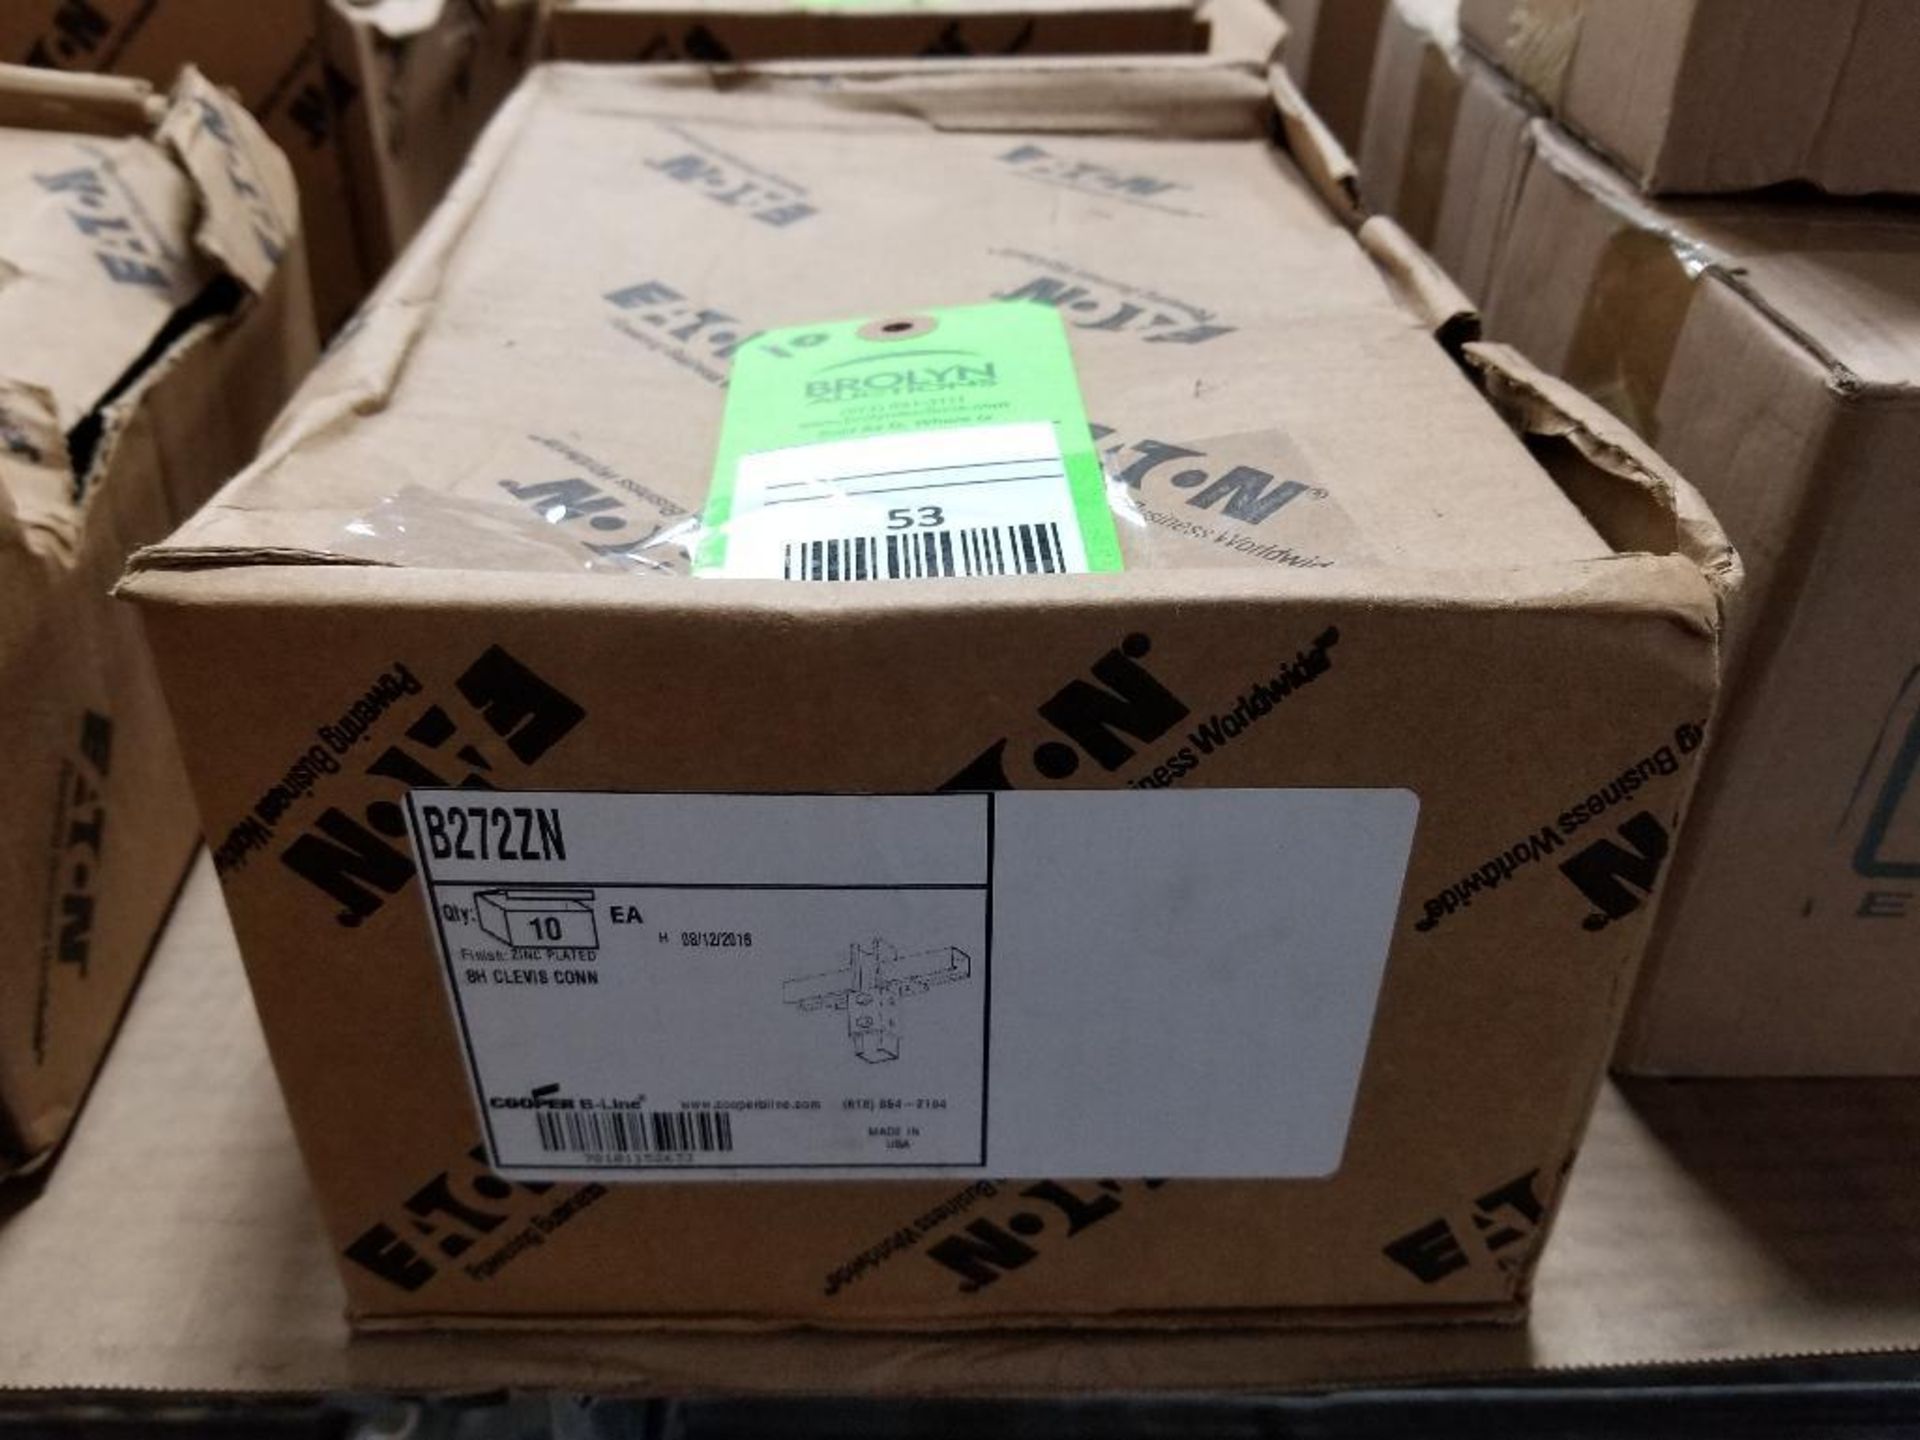 Qty 10 - Eaton connector. New in bulk box.